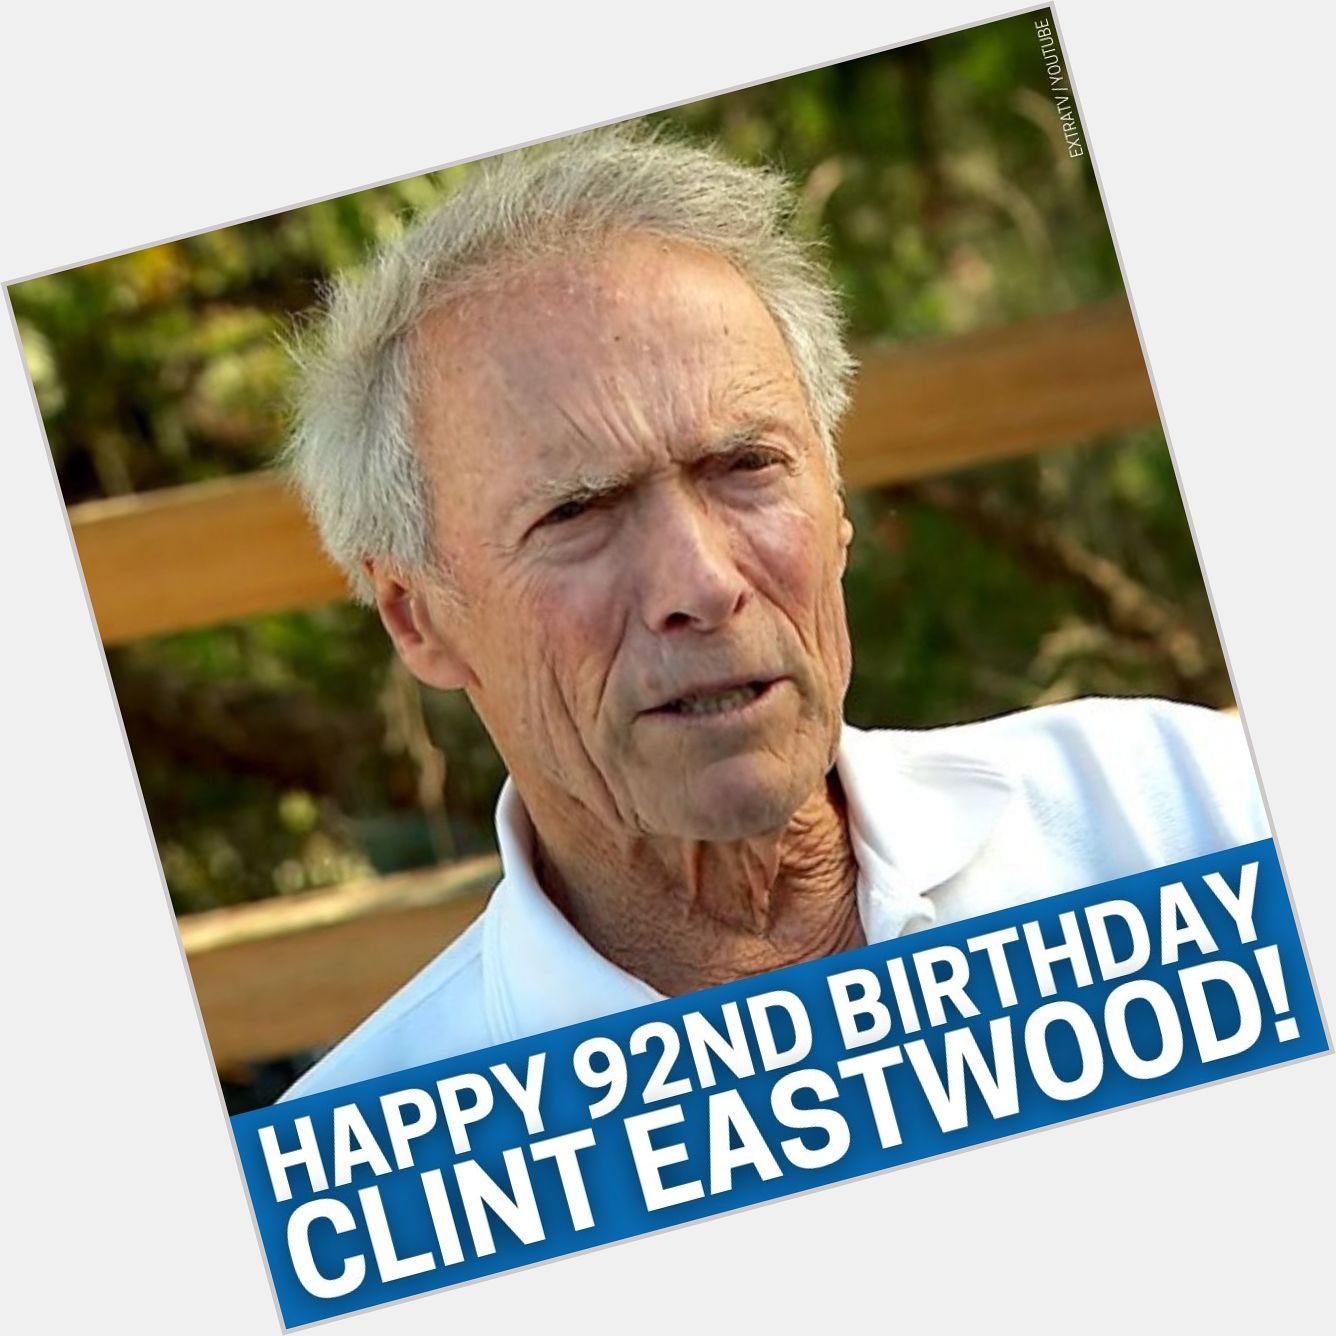 Happy 92nd birthday! What is your favorite Clint Eastwood movie?! 